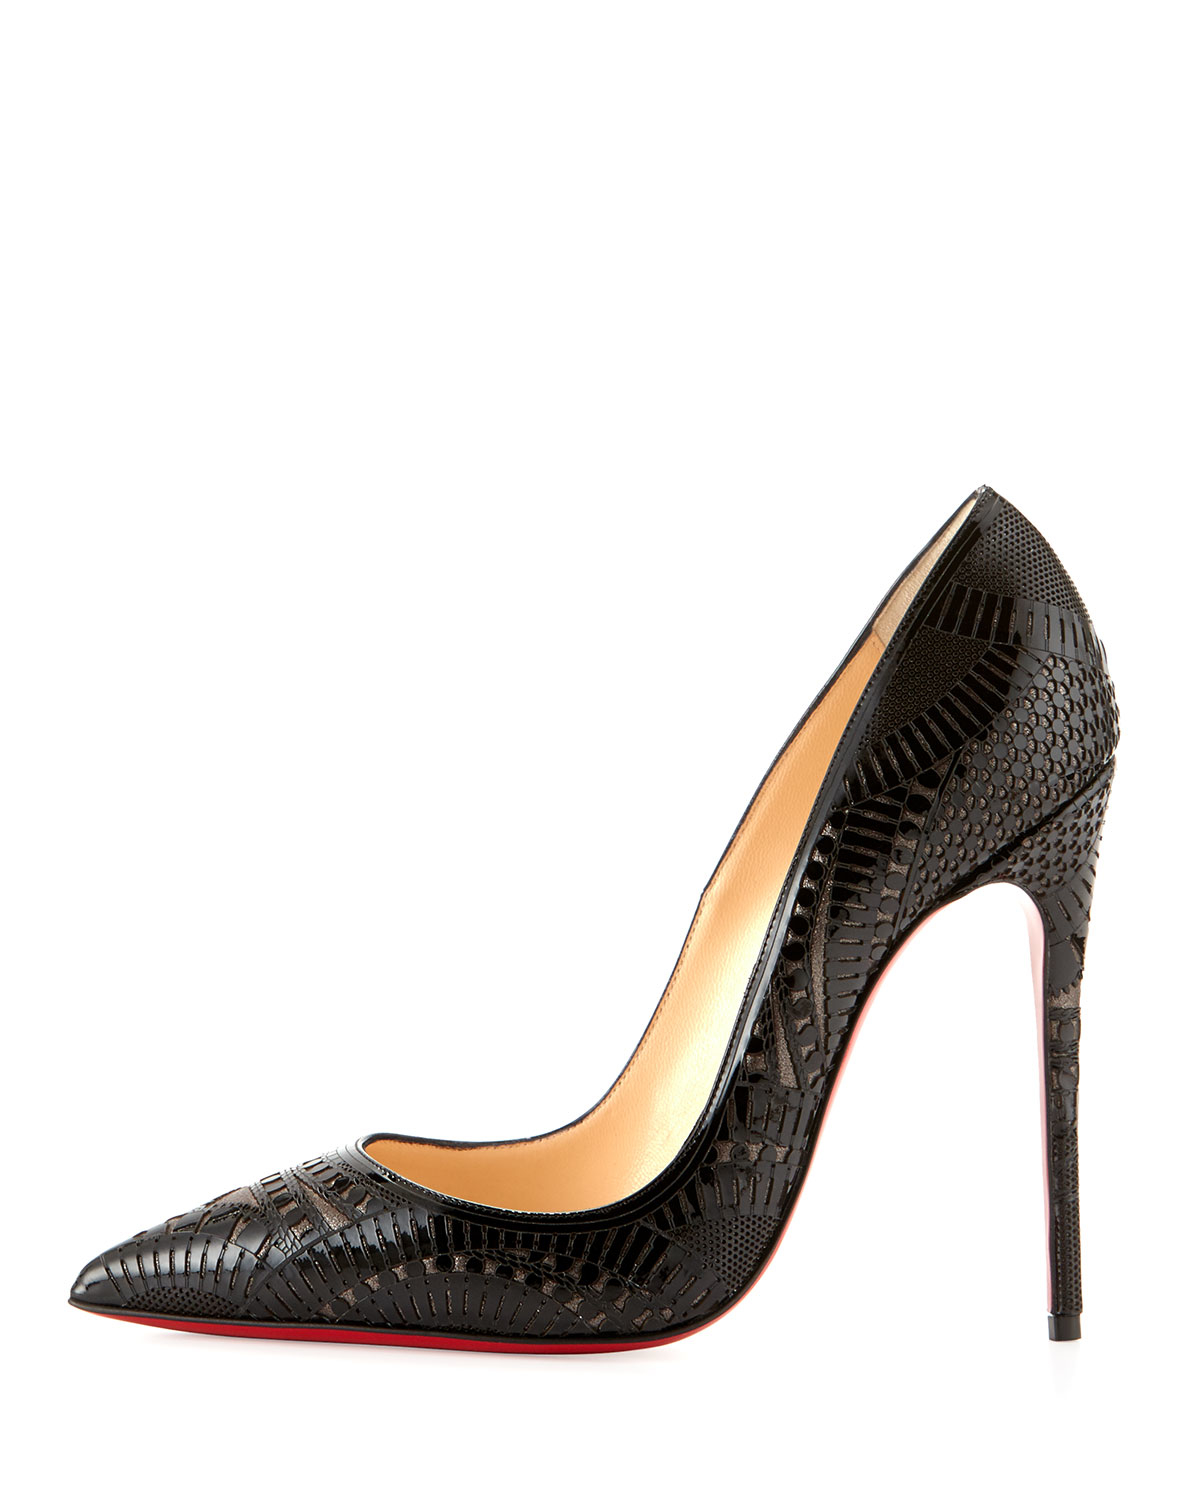 Christian louboutin Kristali Laser-Cut Leather Red Sole Pump in ...